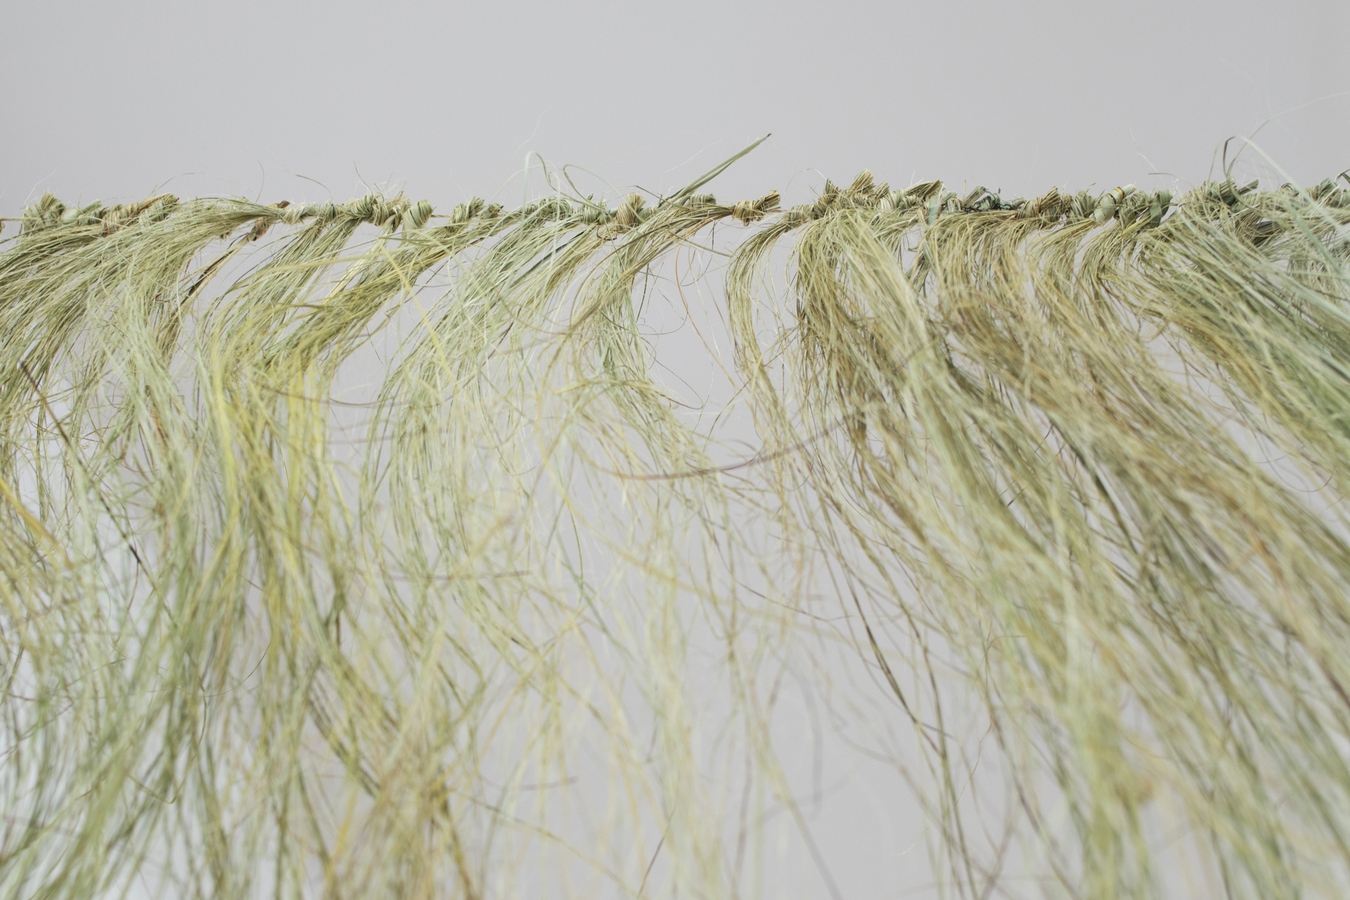 Image: Invasive weeds (detail), 2022. Photo by Janneth Gil.